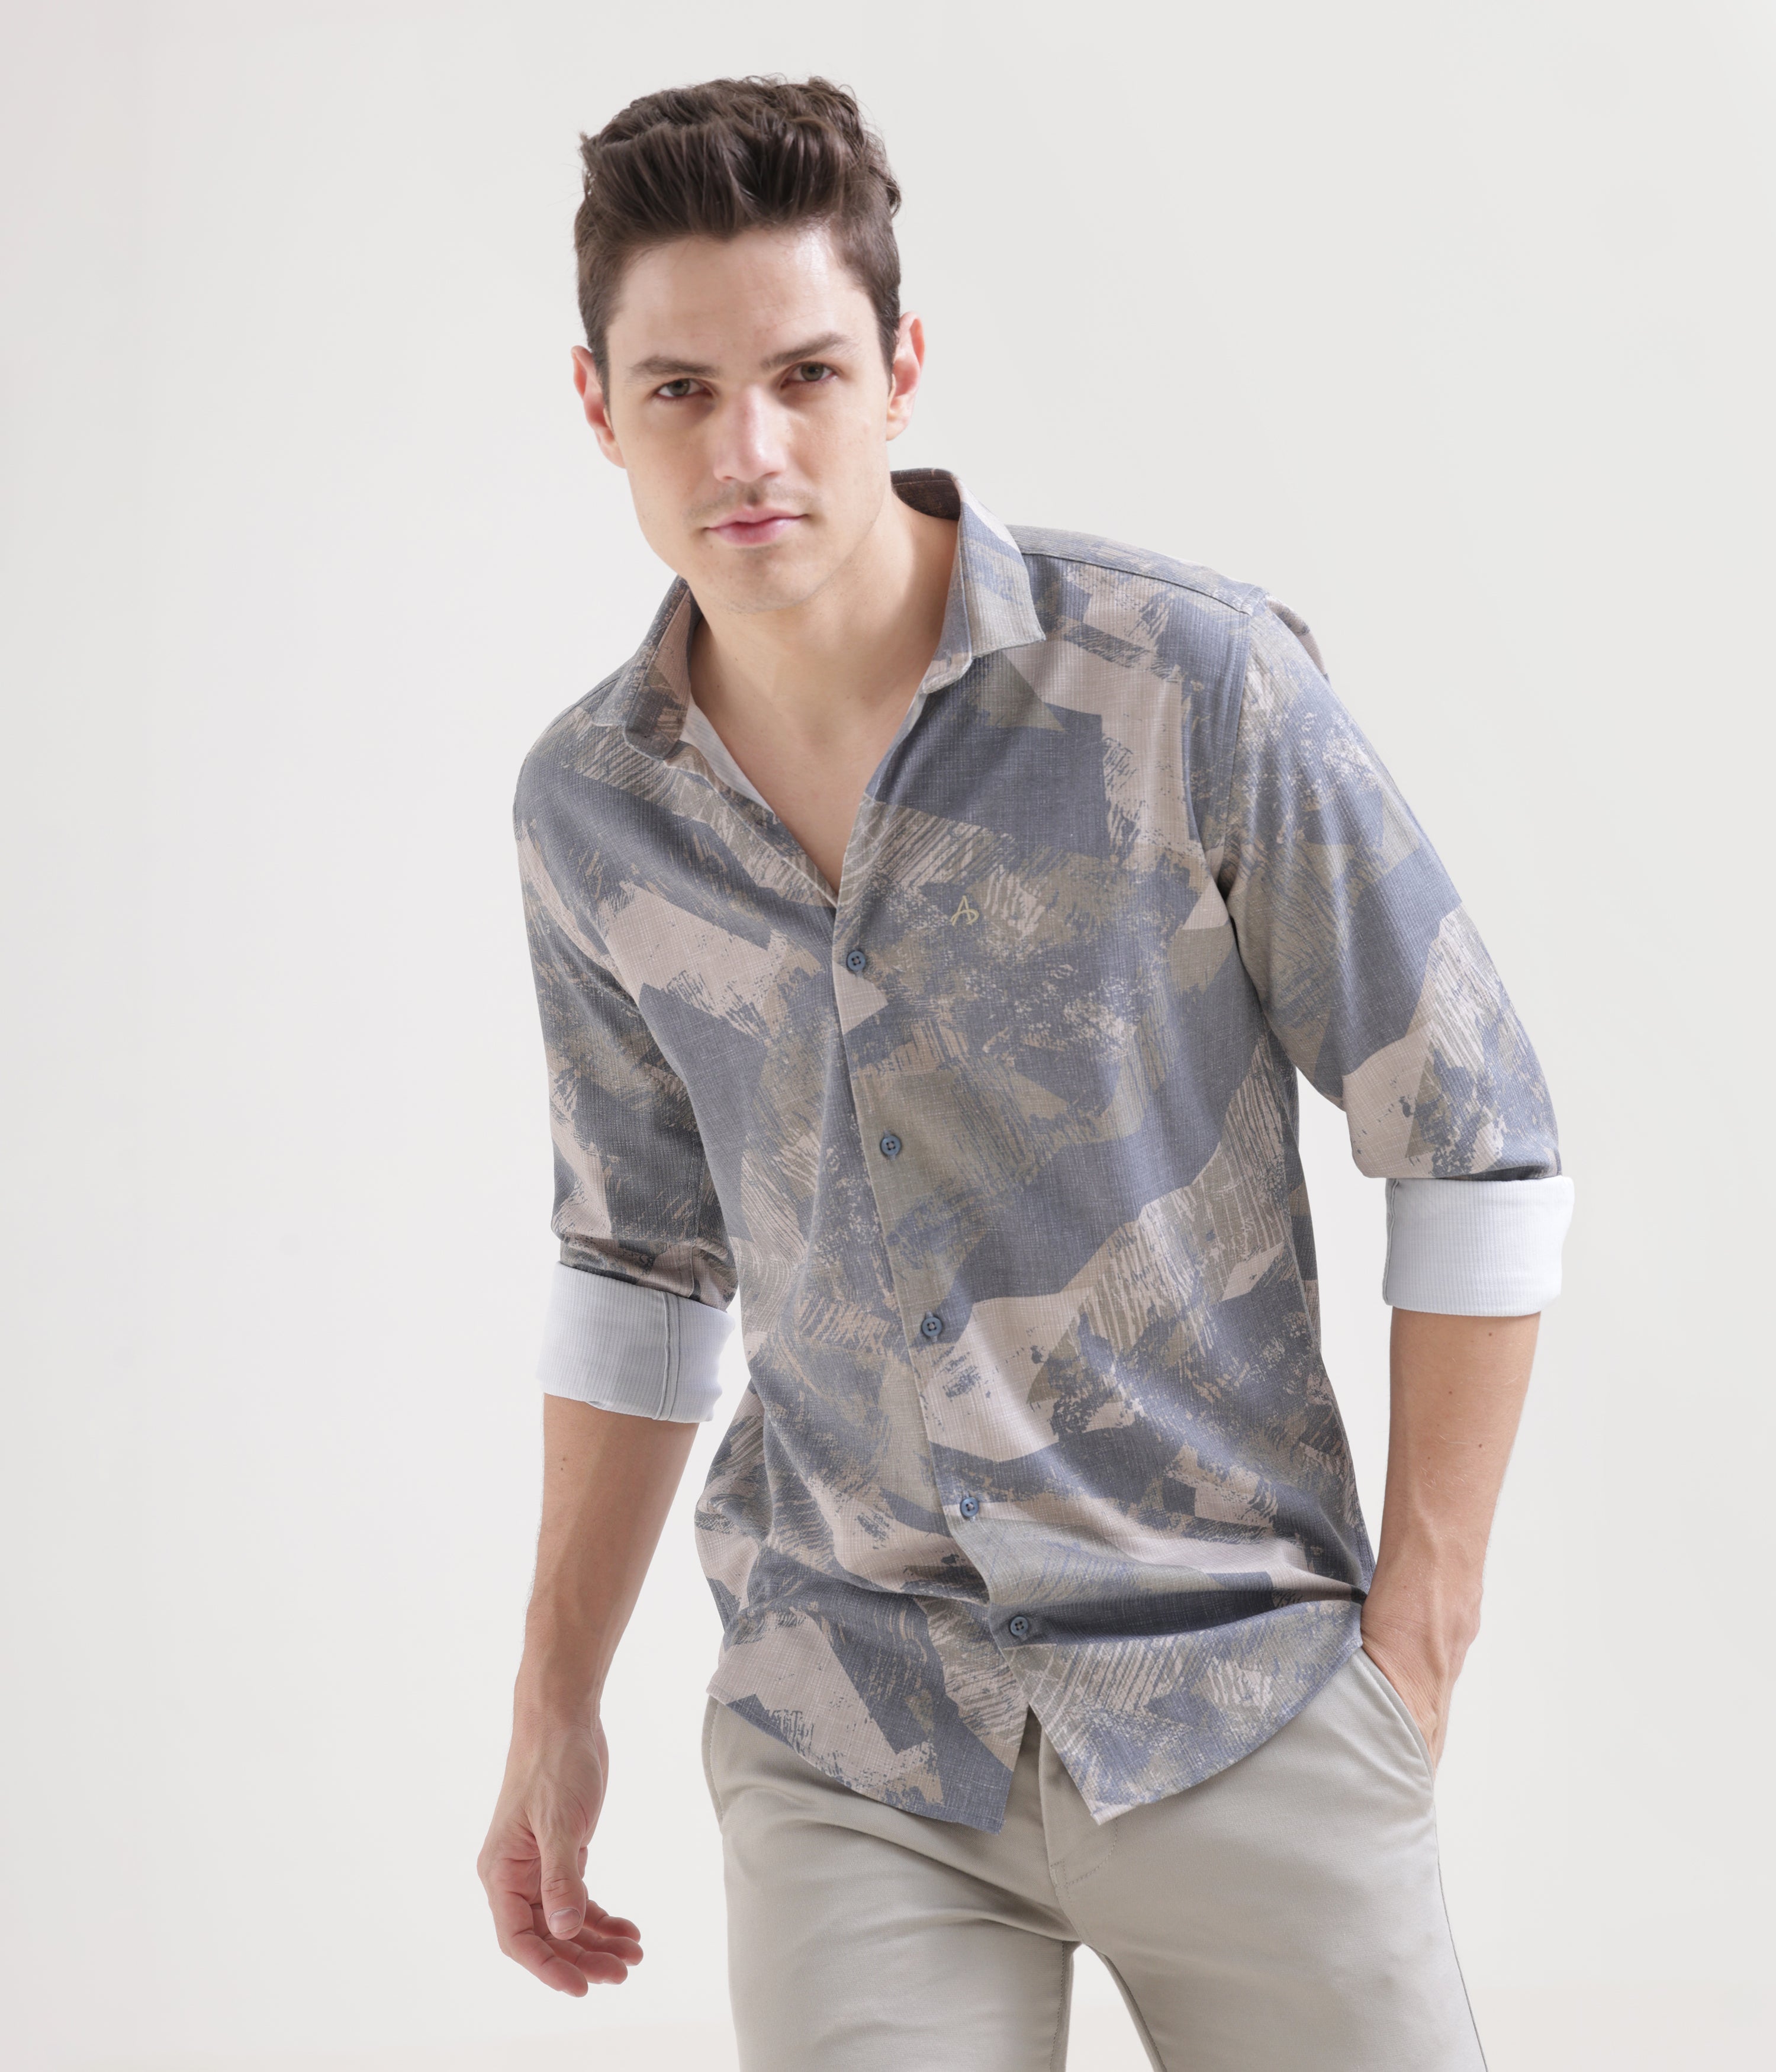 Beige Printed Slim Fit Shirt: Versatile Classic for Every Occasion